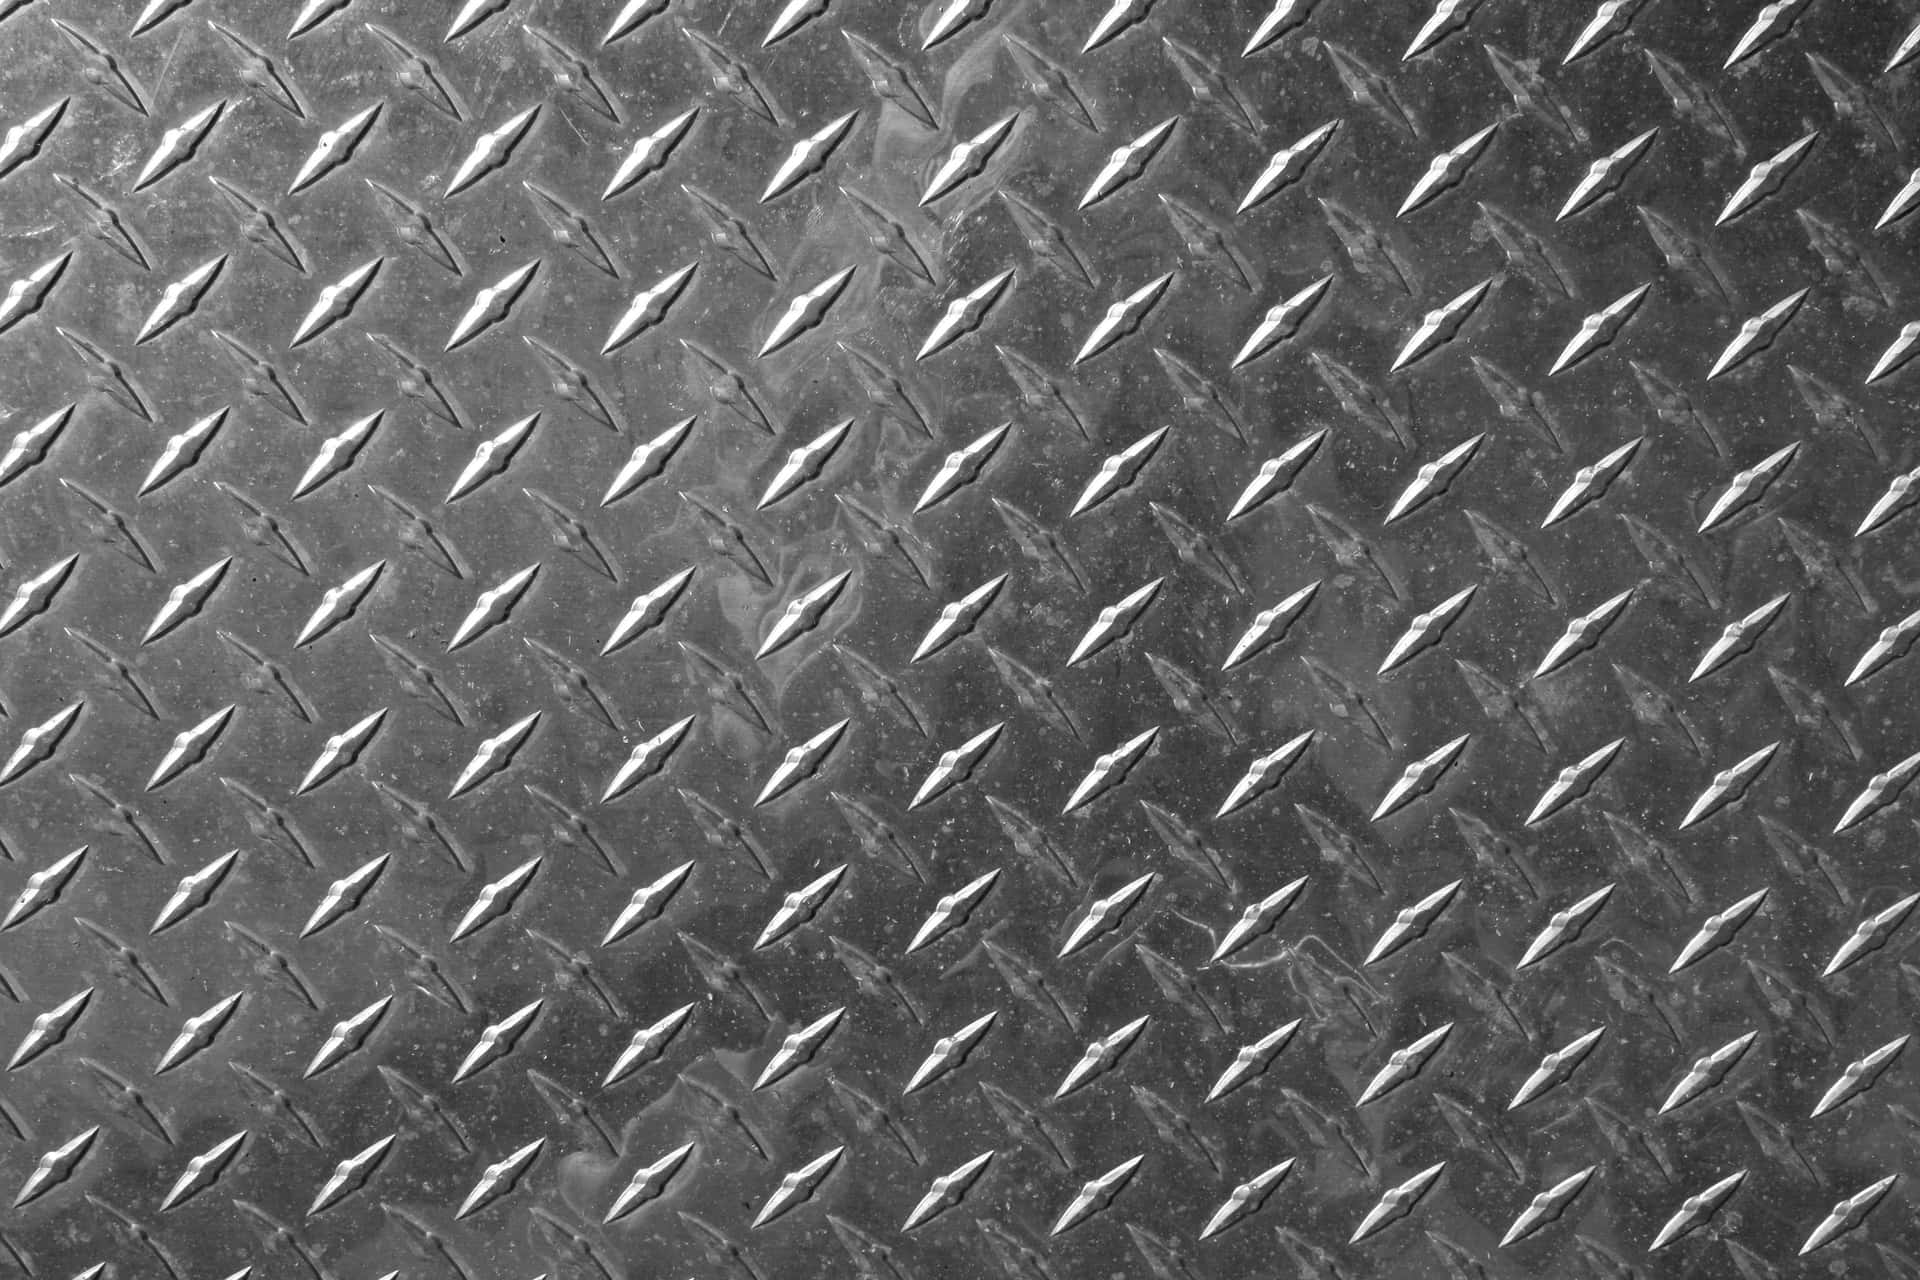 Corrugated Metal Texture: Background Images & Pictures